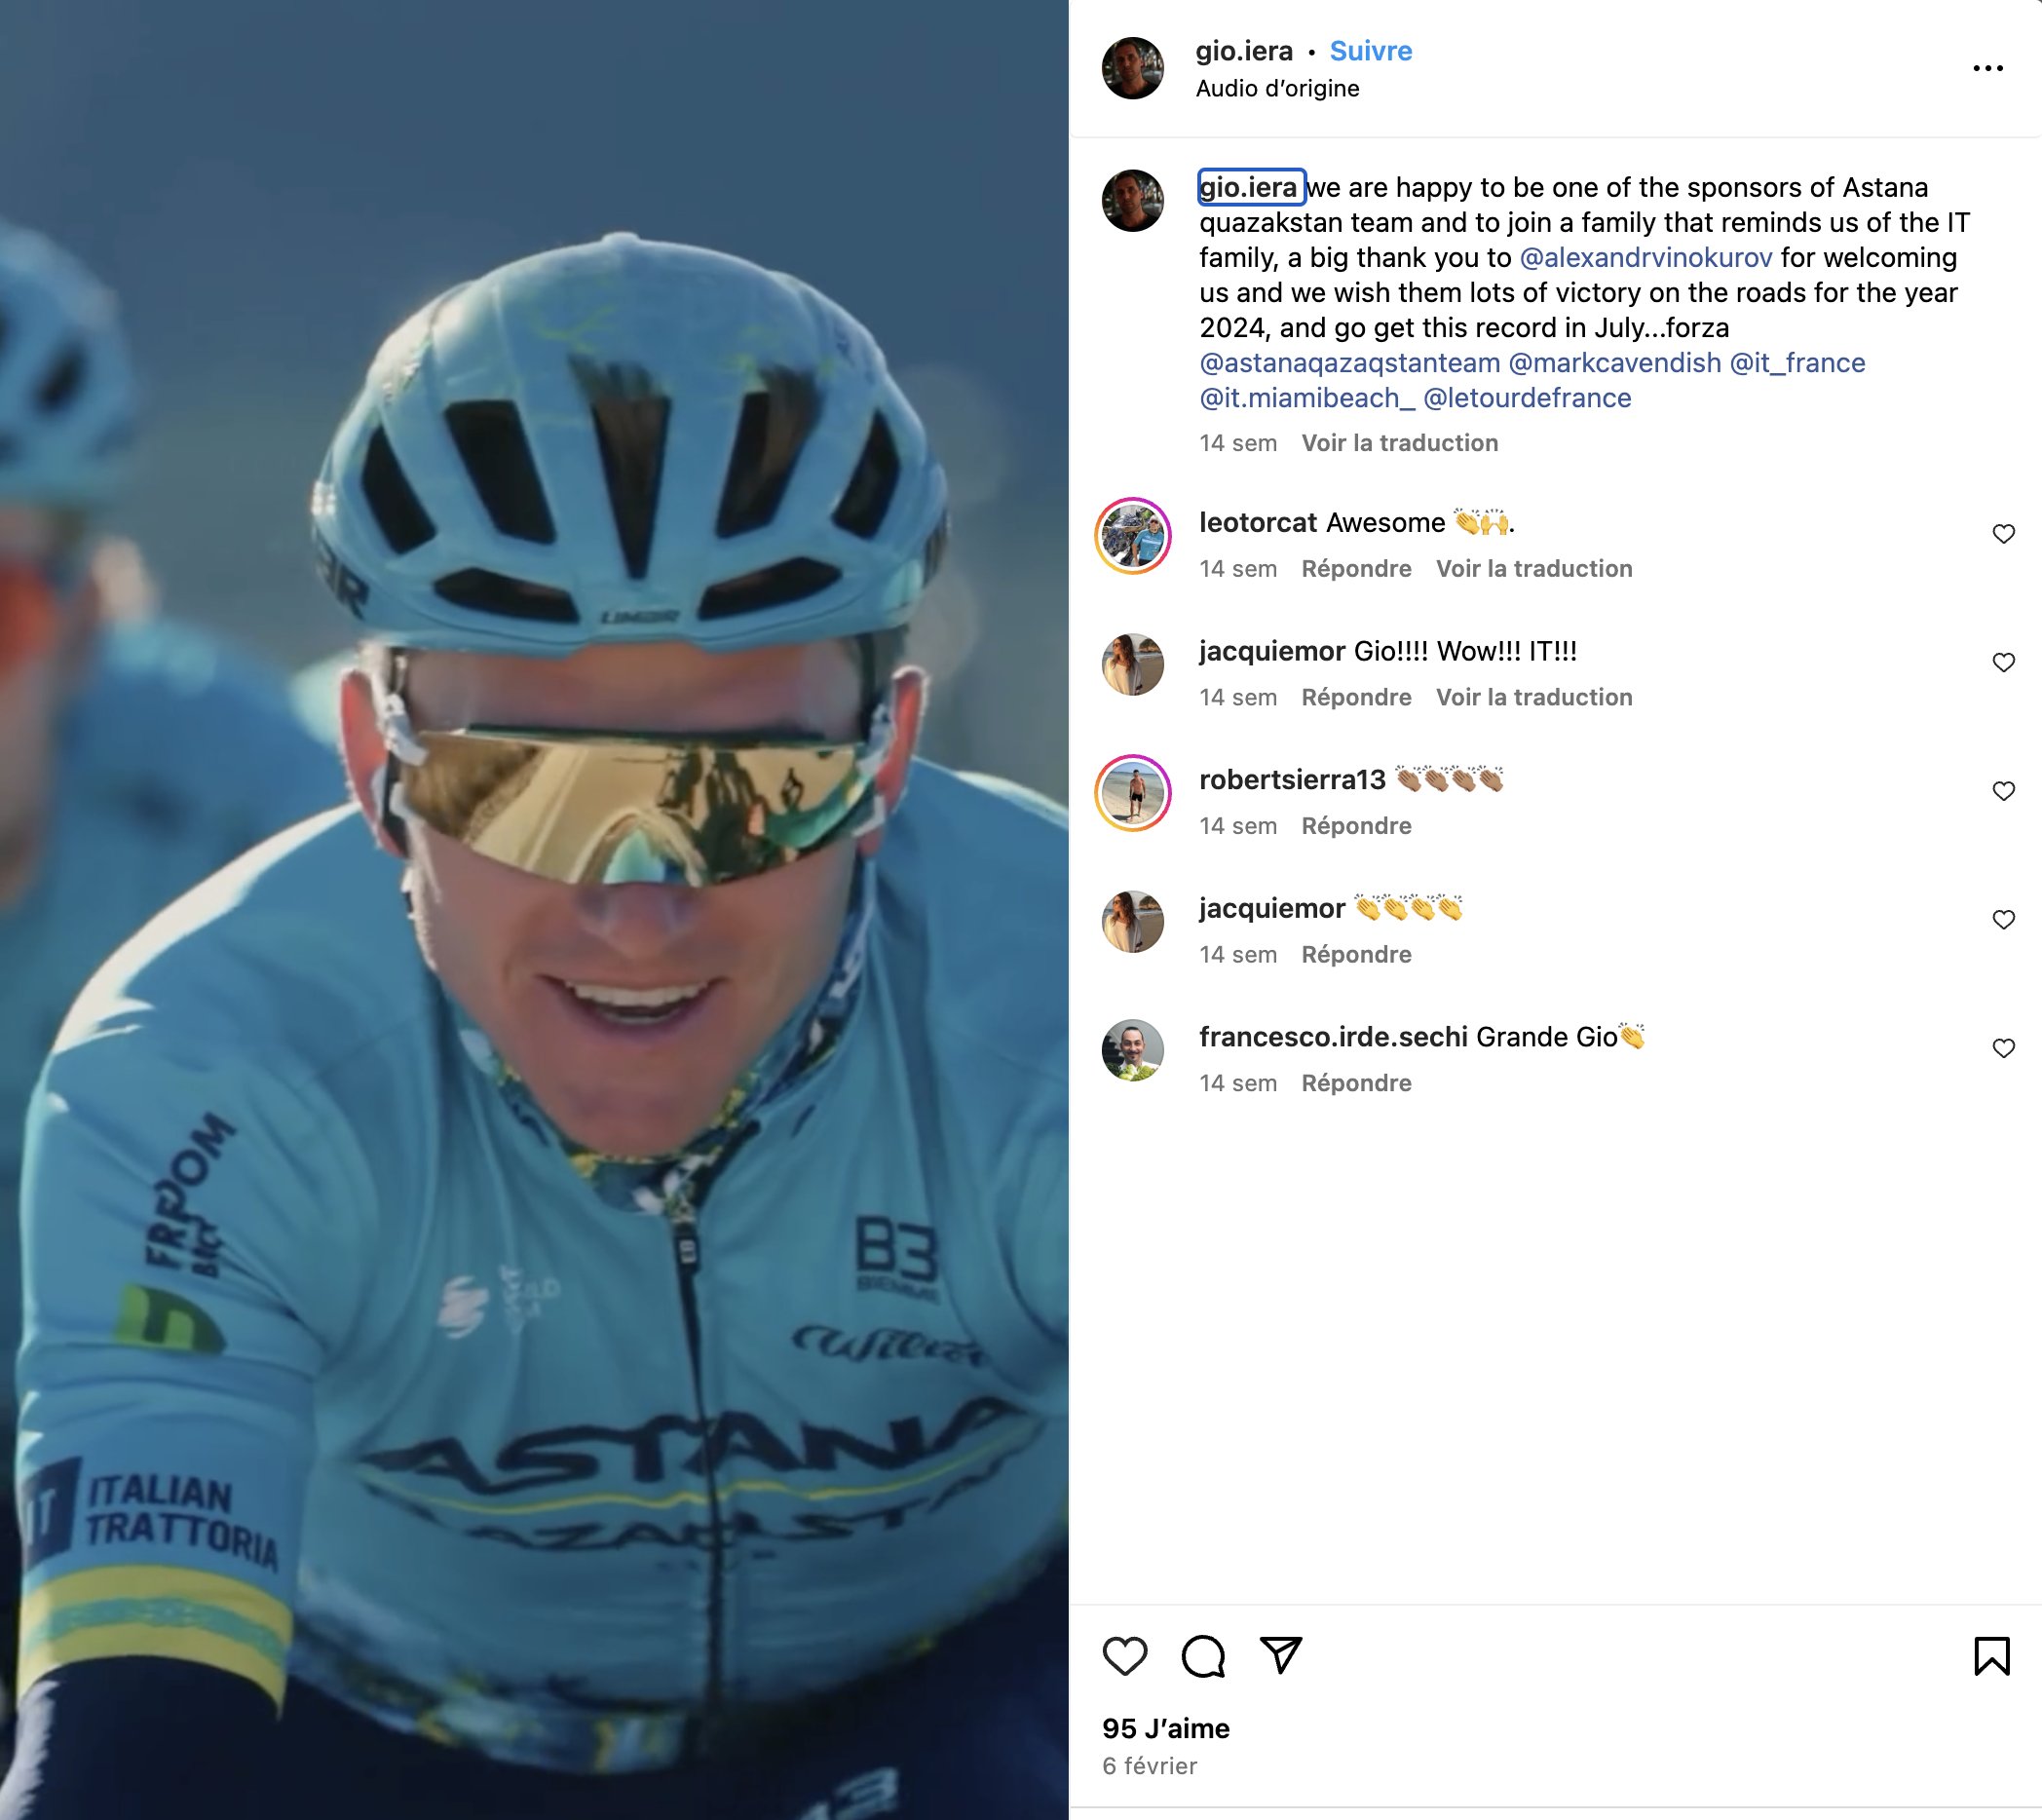 Iera posting on Instagram announcing his company would be sponsoring Astana-Qazaqstan.